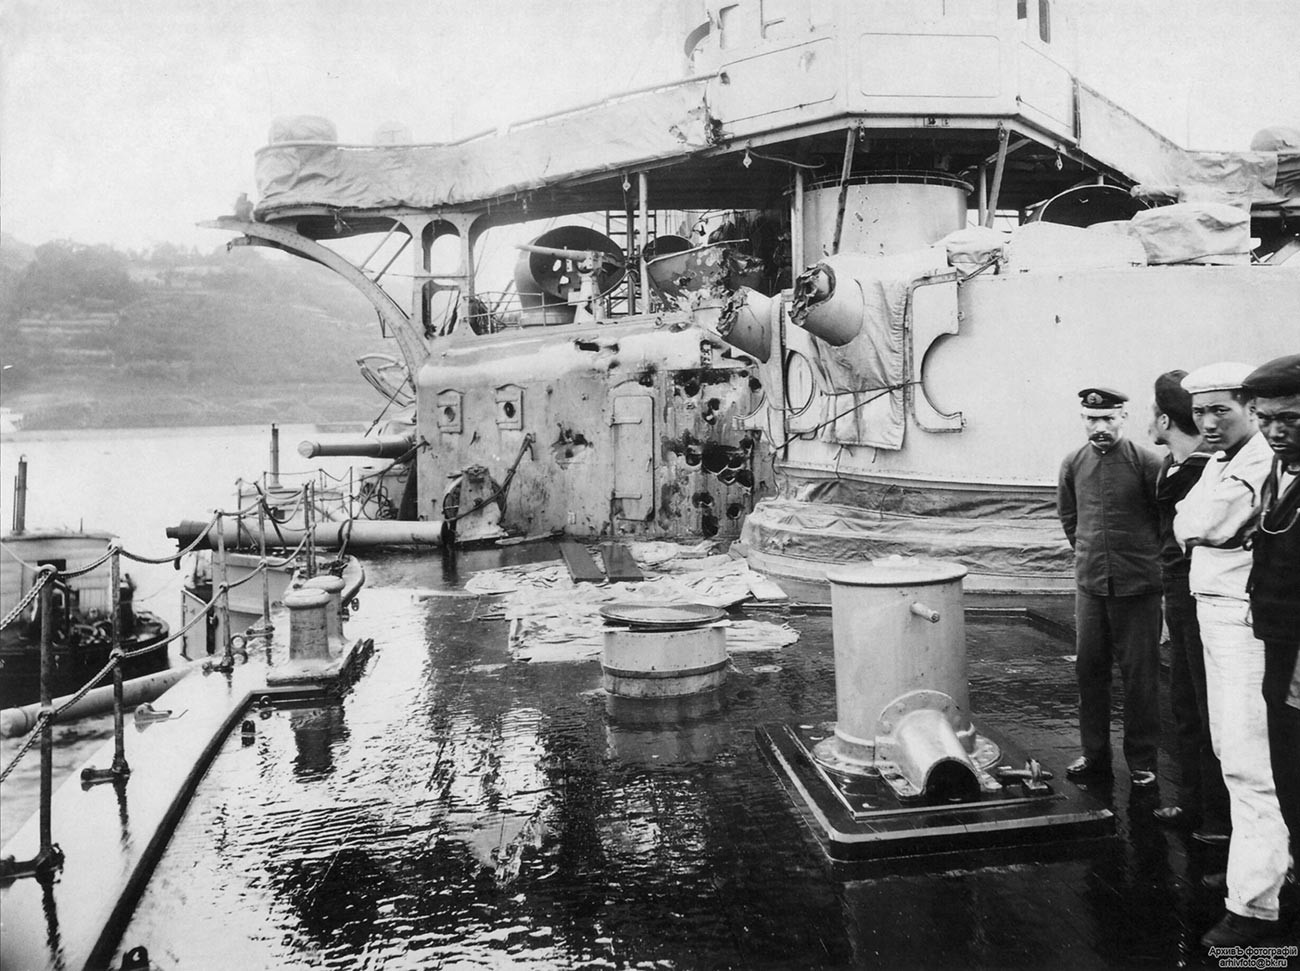 Photo of damage to Japanese armored cruiser Nisshin after one of its guns burst during the Battle of Tsushima in May 1905.